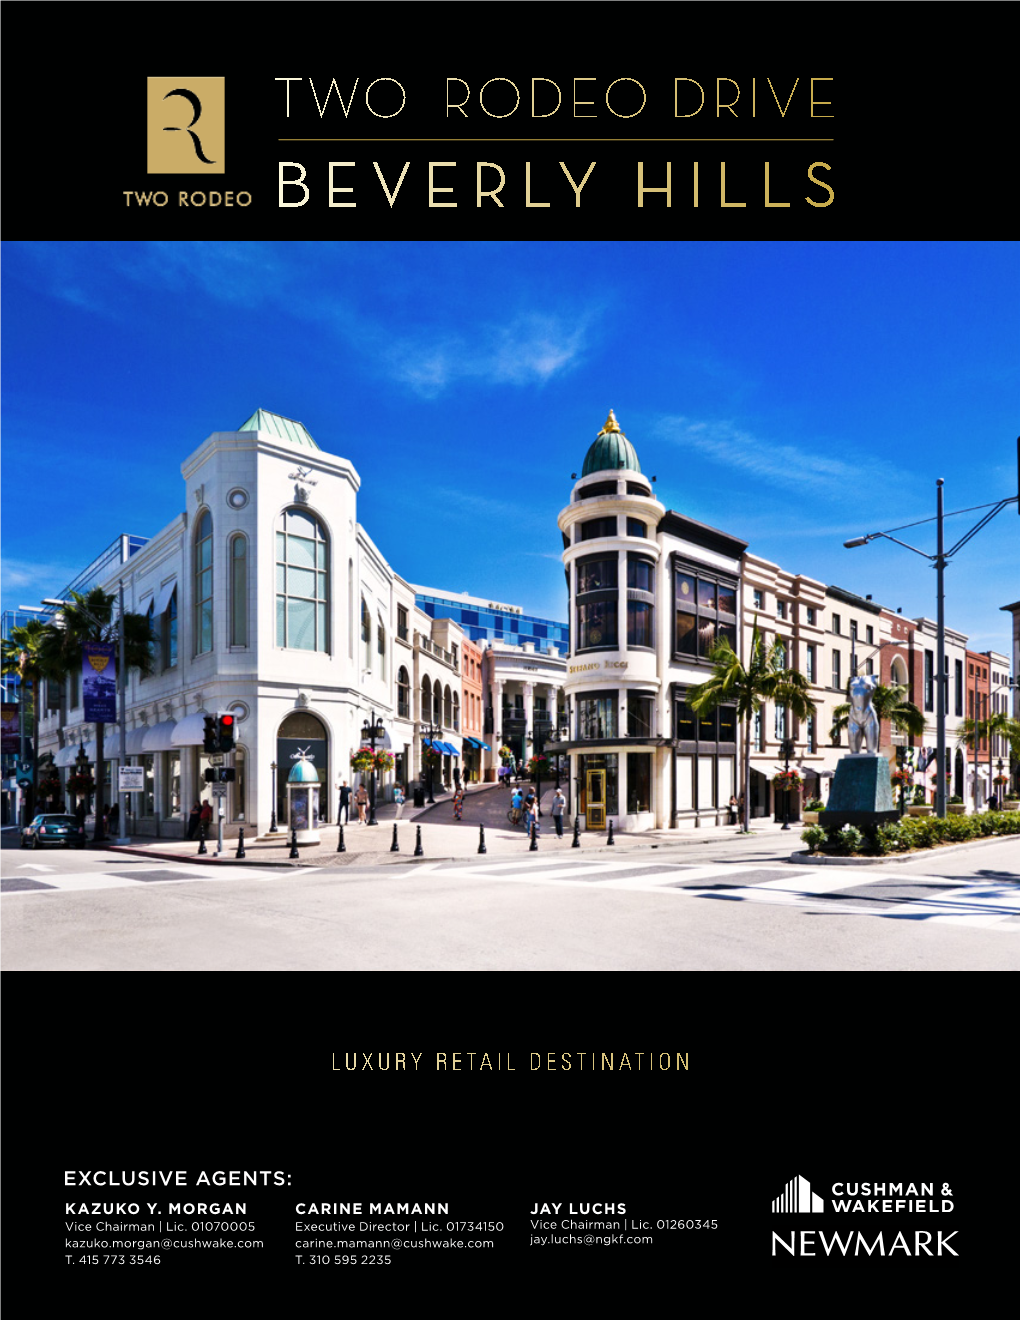 Two Rodeo Drive Beverly Hills